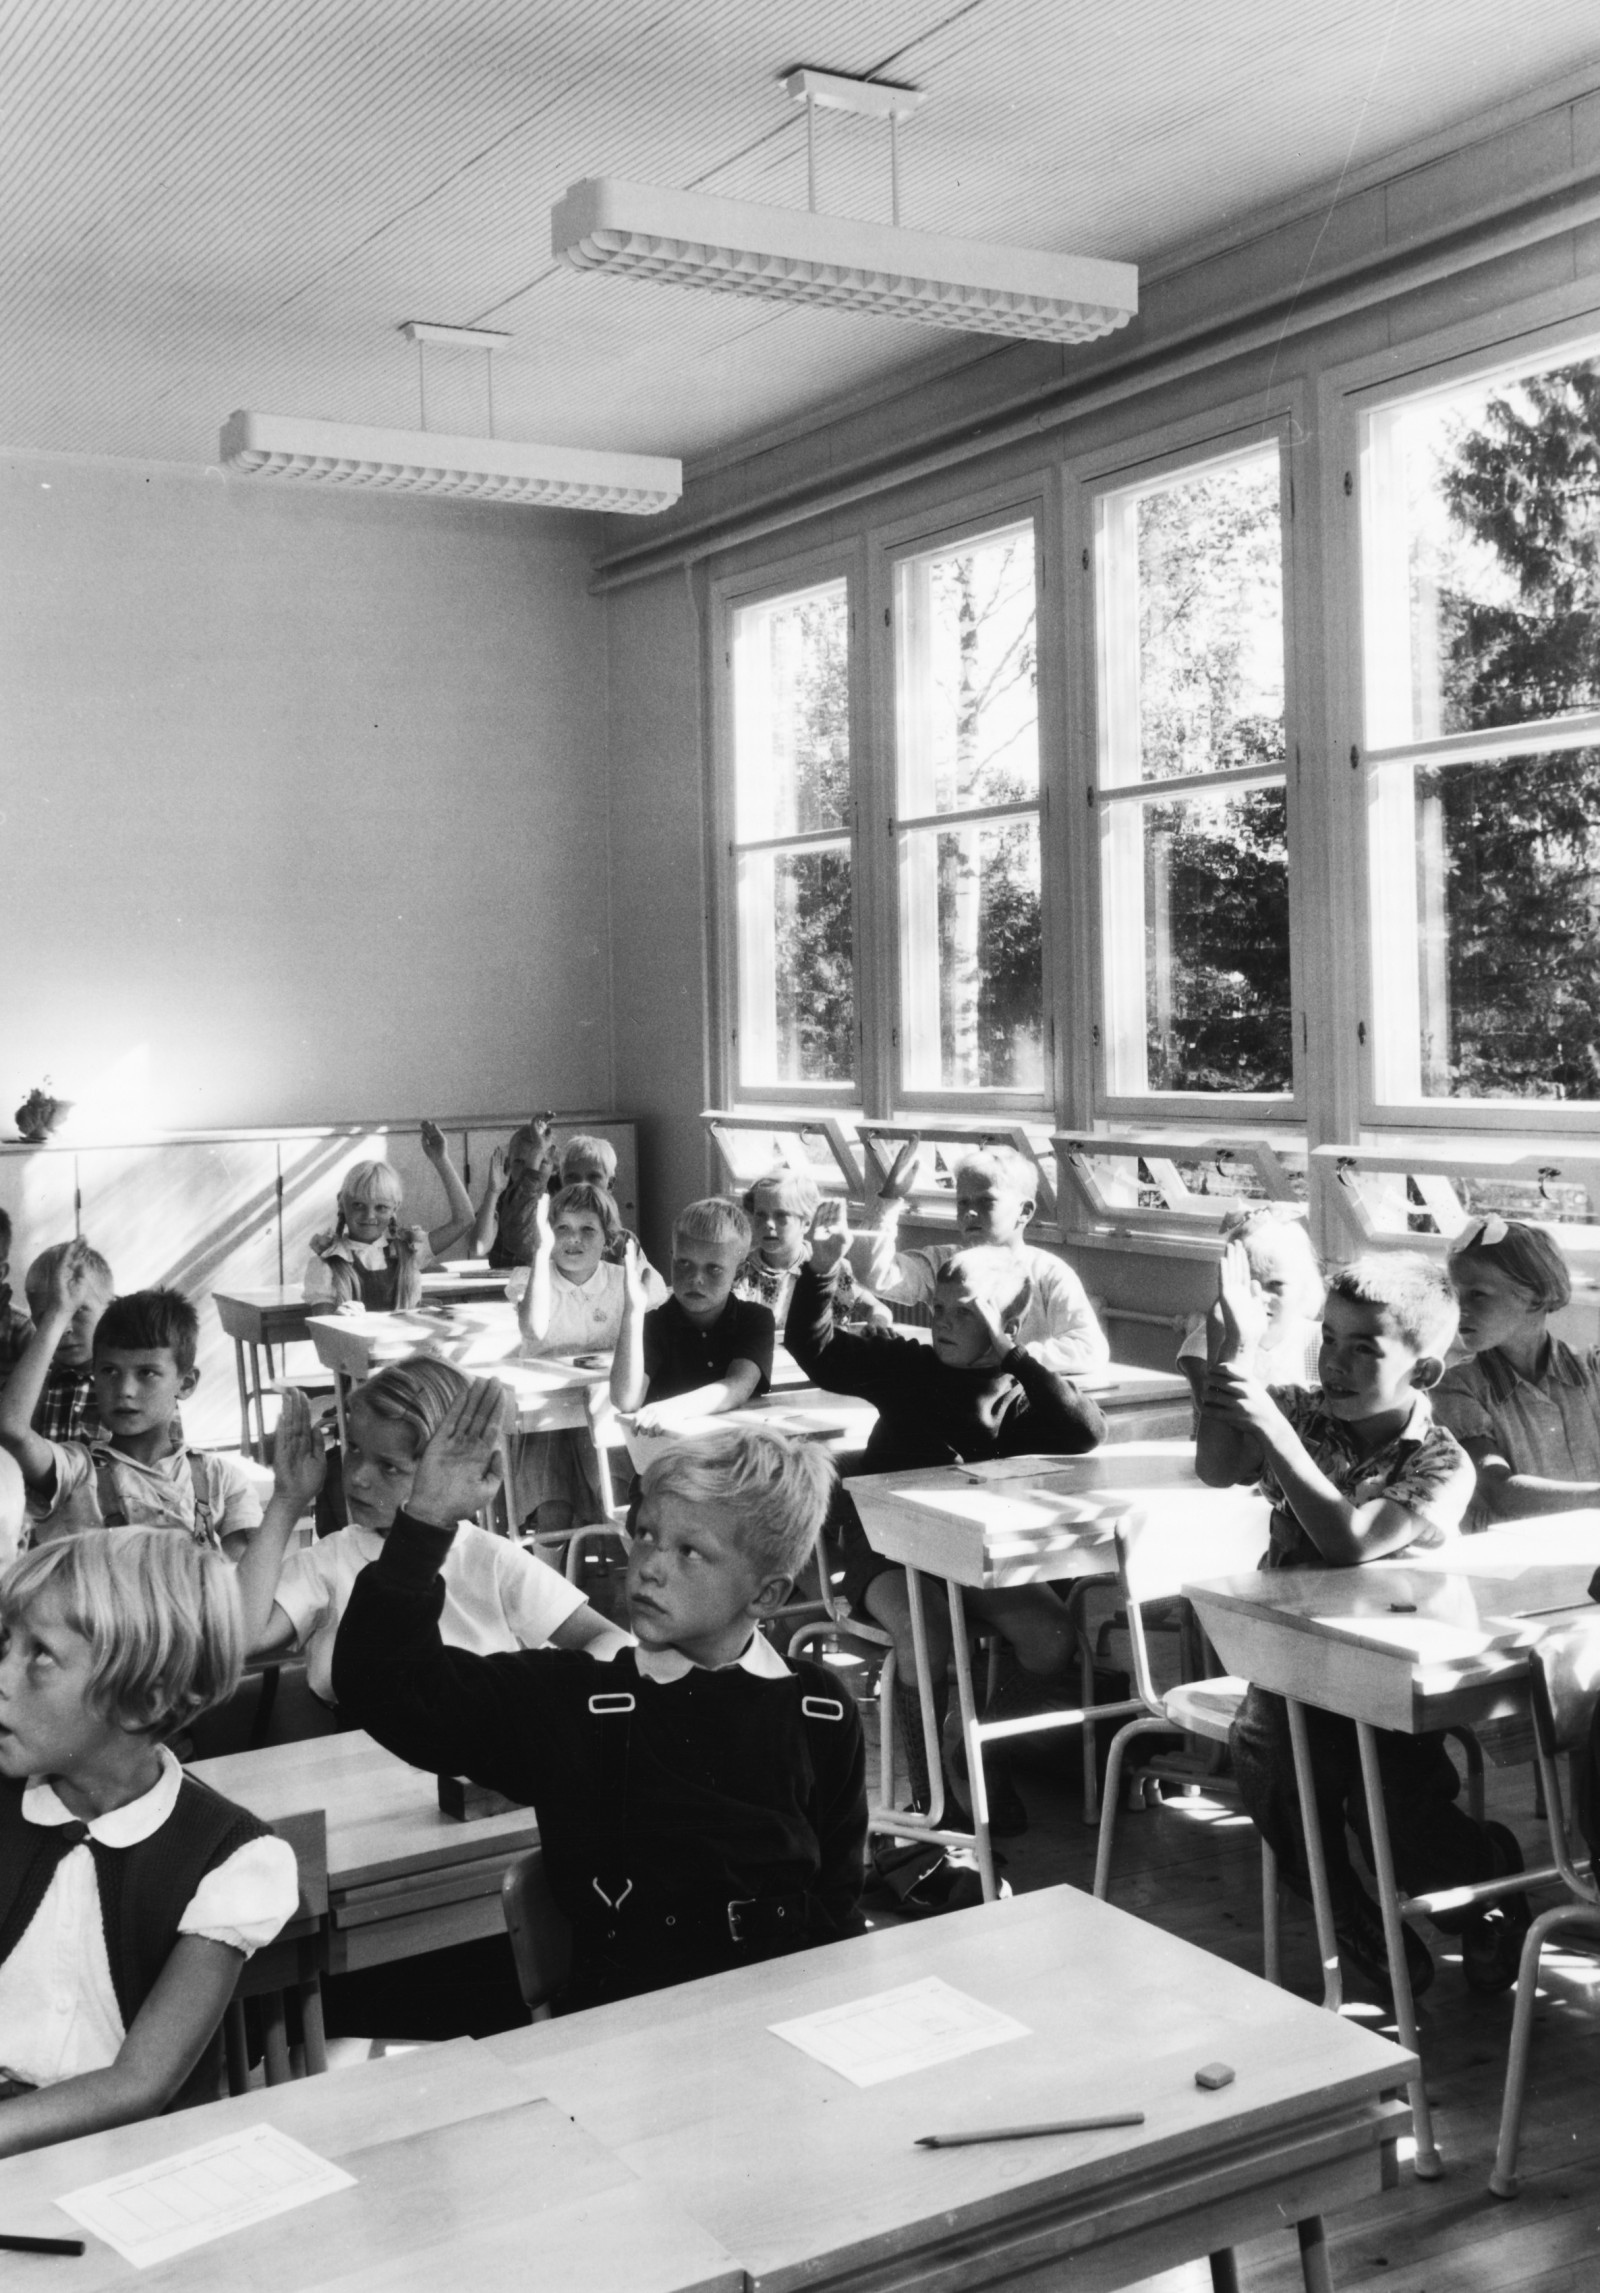 Black and white photo of Puutalo school classroom, where a class is in session. The pupils are raising their hands.